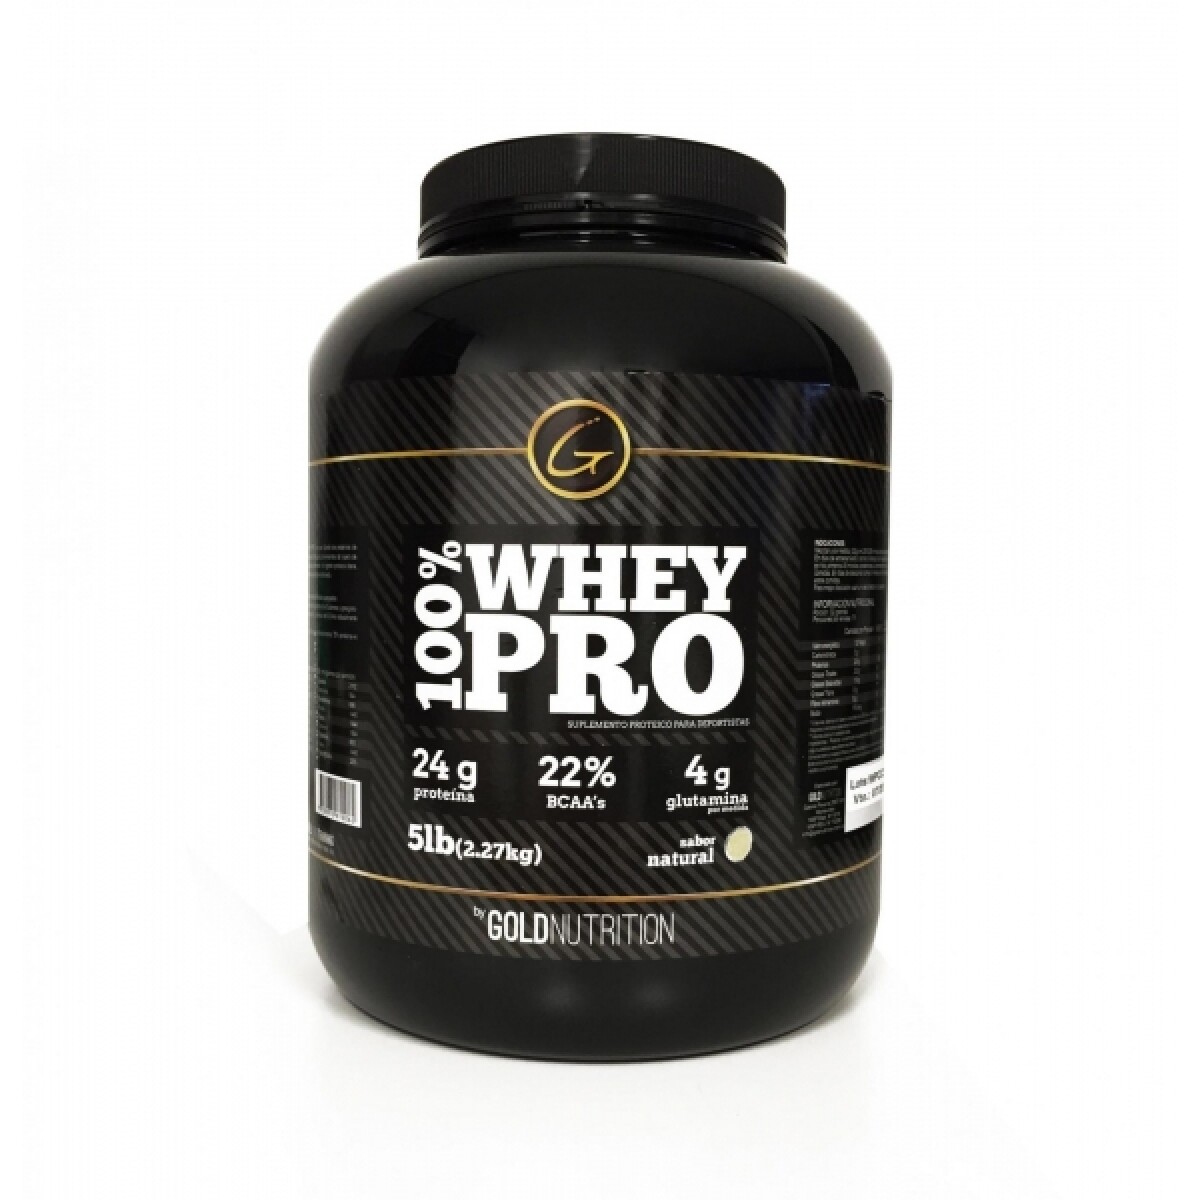 Proteína 100% Whey Pro 5gold Nutrition Natural 5 Lbs. 